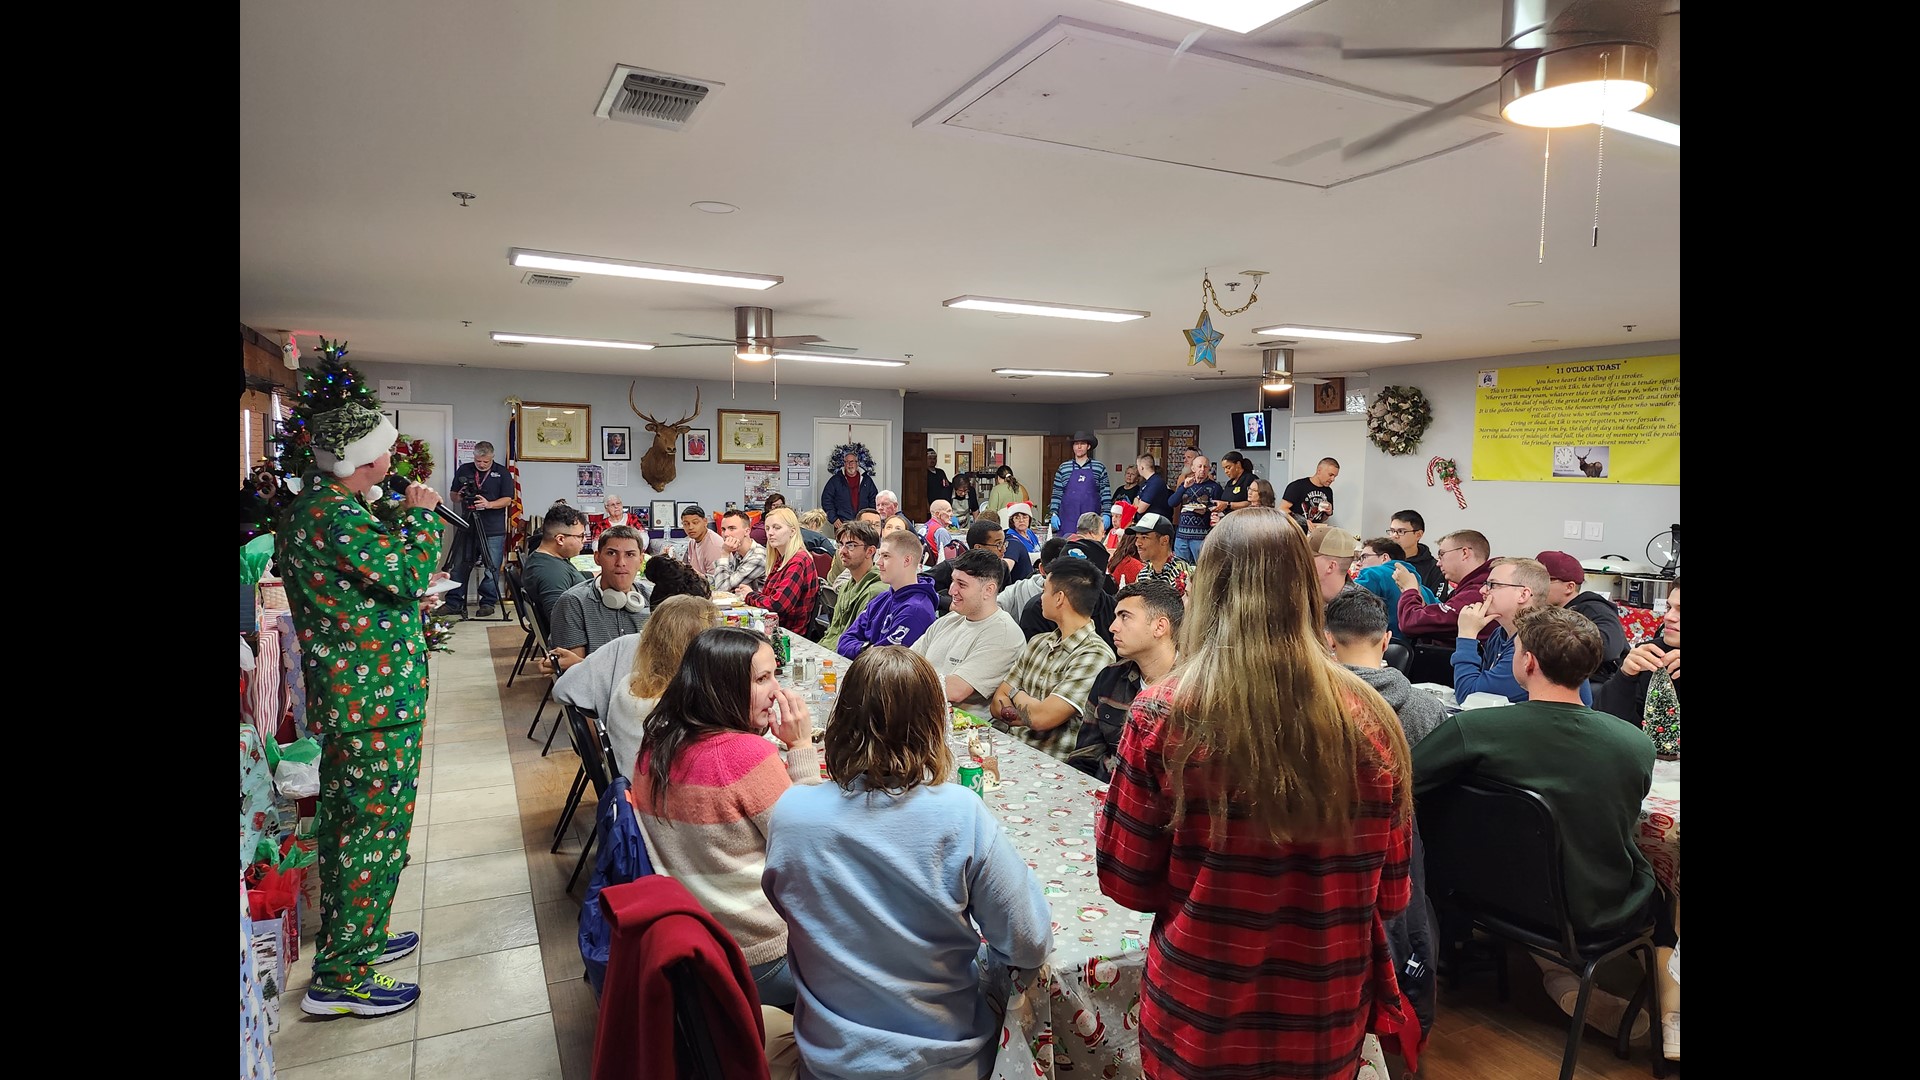 The San Angelo Elks Lodge 1880 made sure Goodfellow Air Force Base servicemembers had a "Home Away from Home" on Christmas Day.